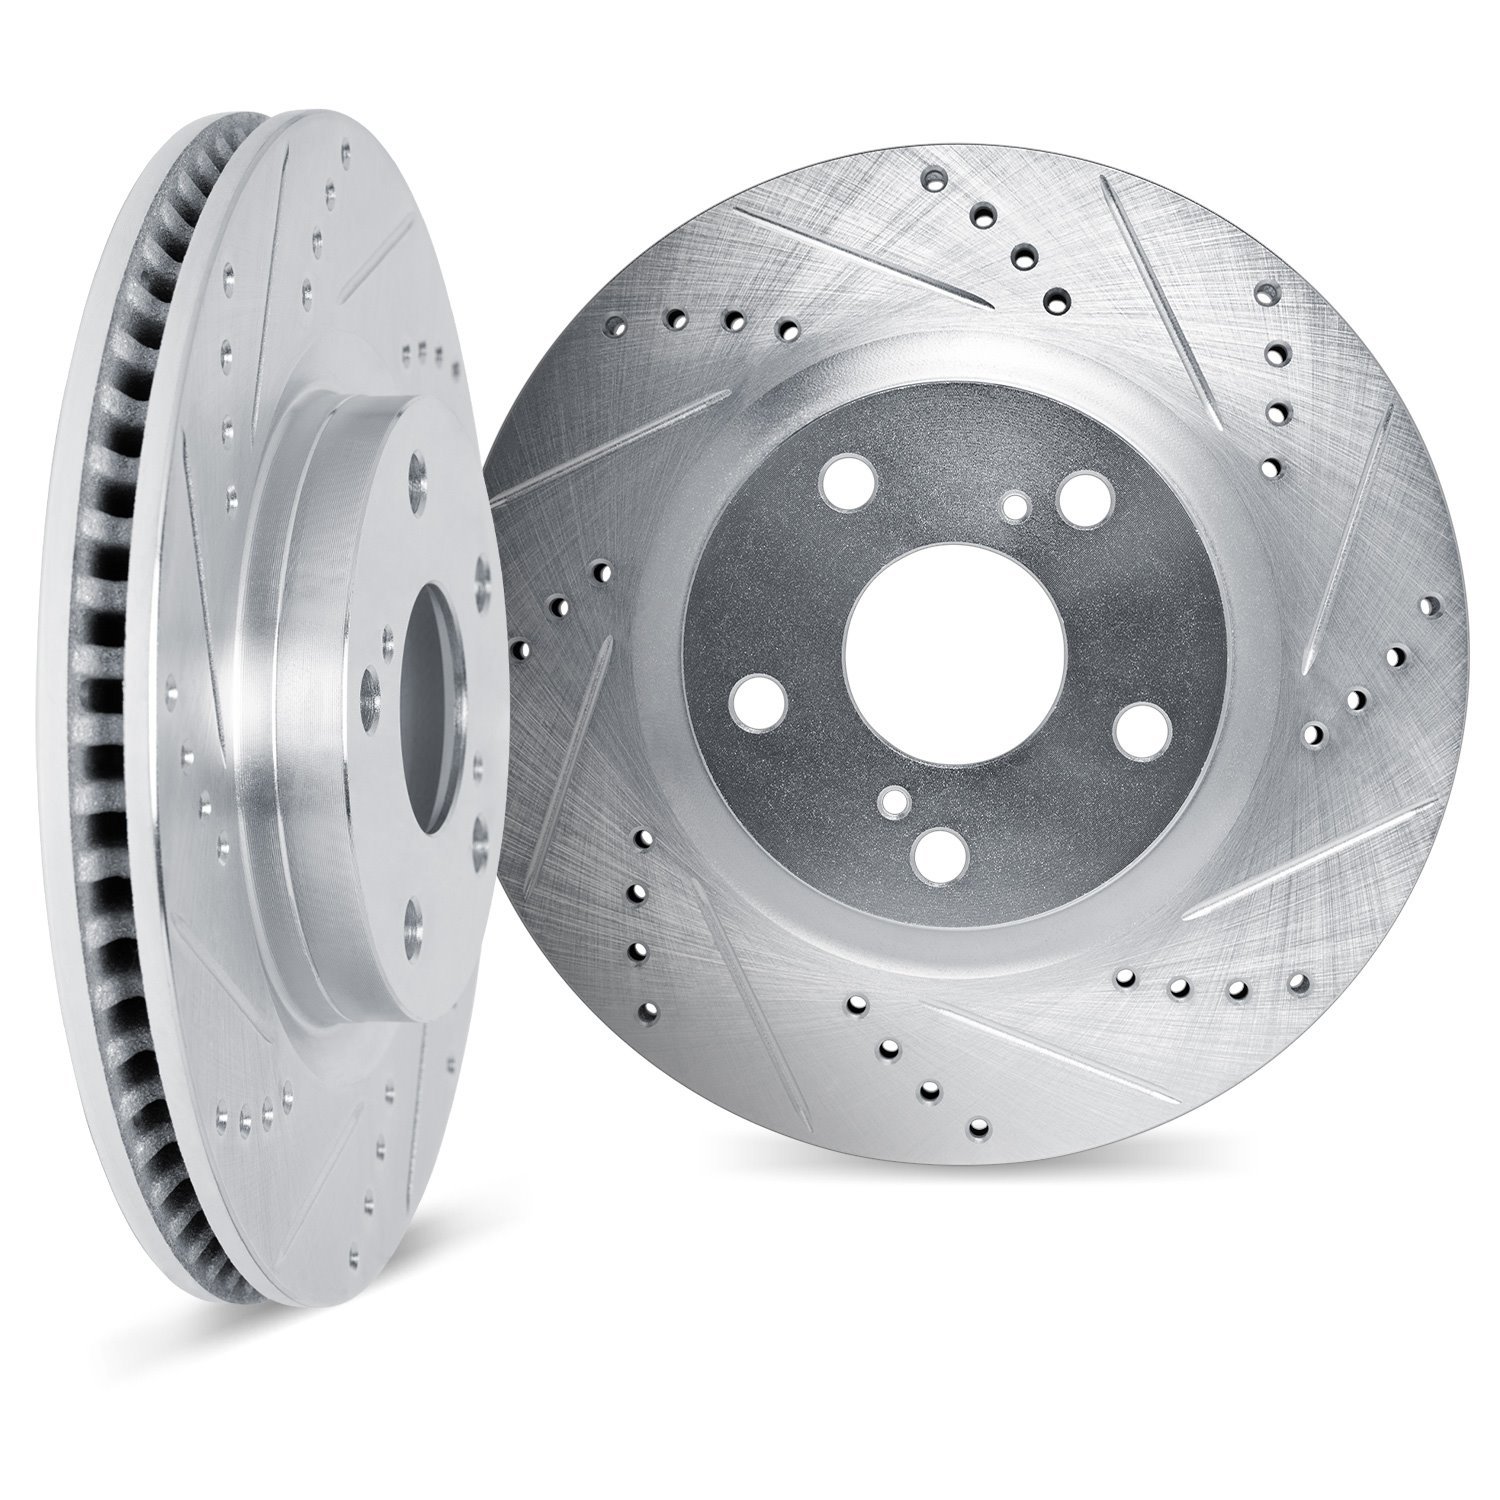 7002-13026 Drilled/Slotted Brake Rotors [Silver], Fits Select Multiple Makes/Models, Position: Rear